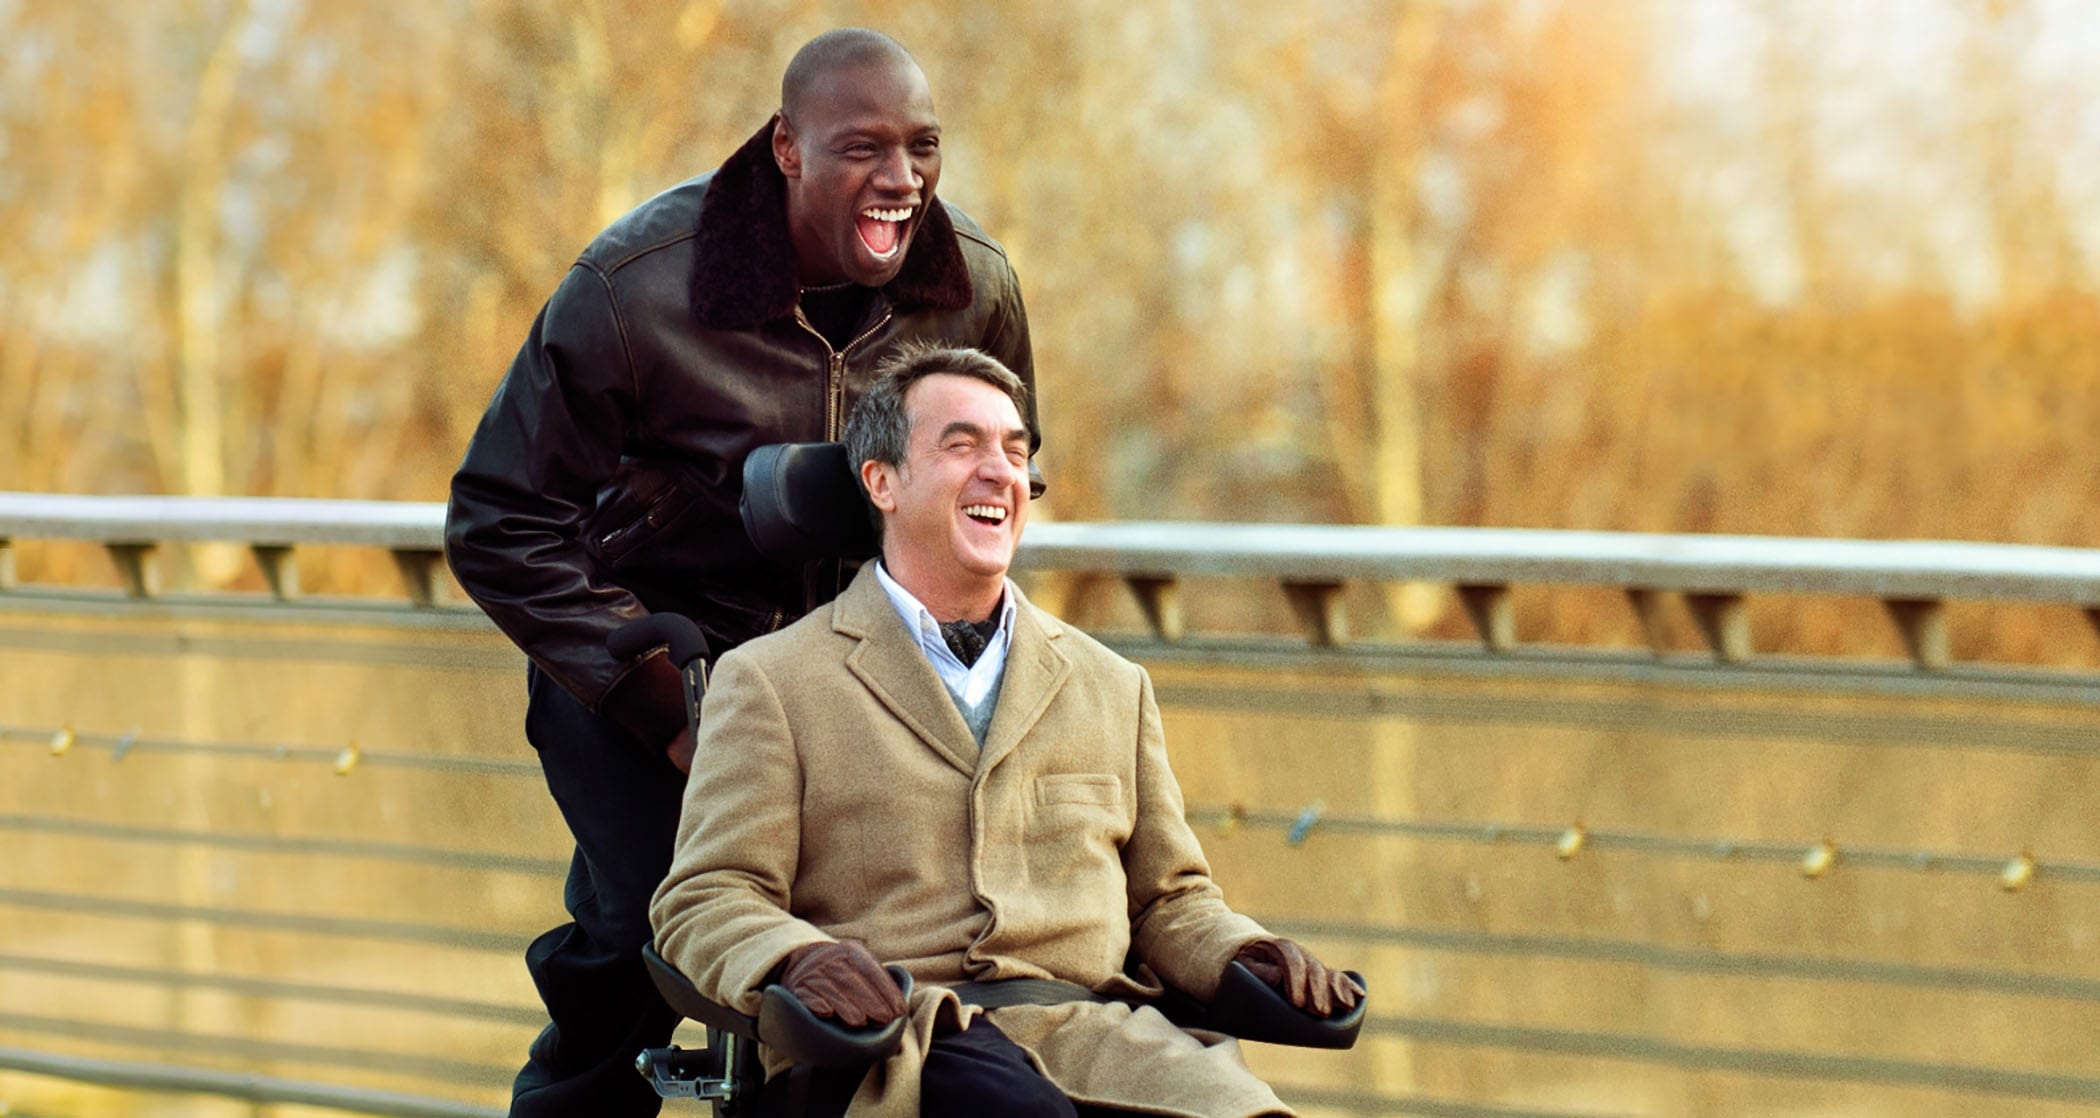 The Intouchables Ending, Explained